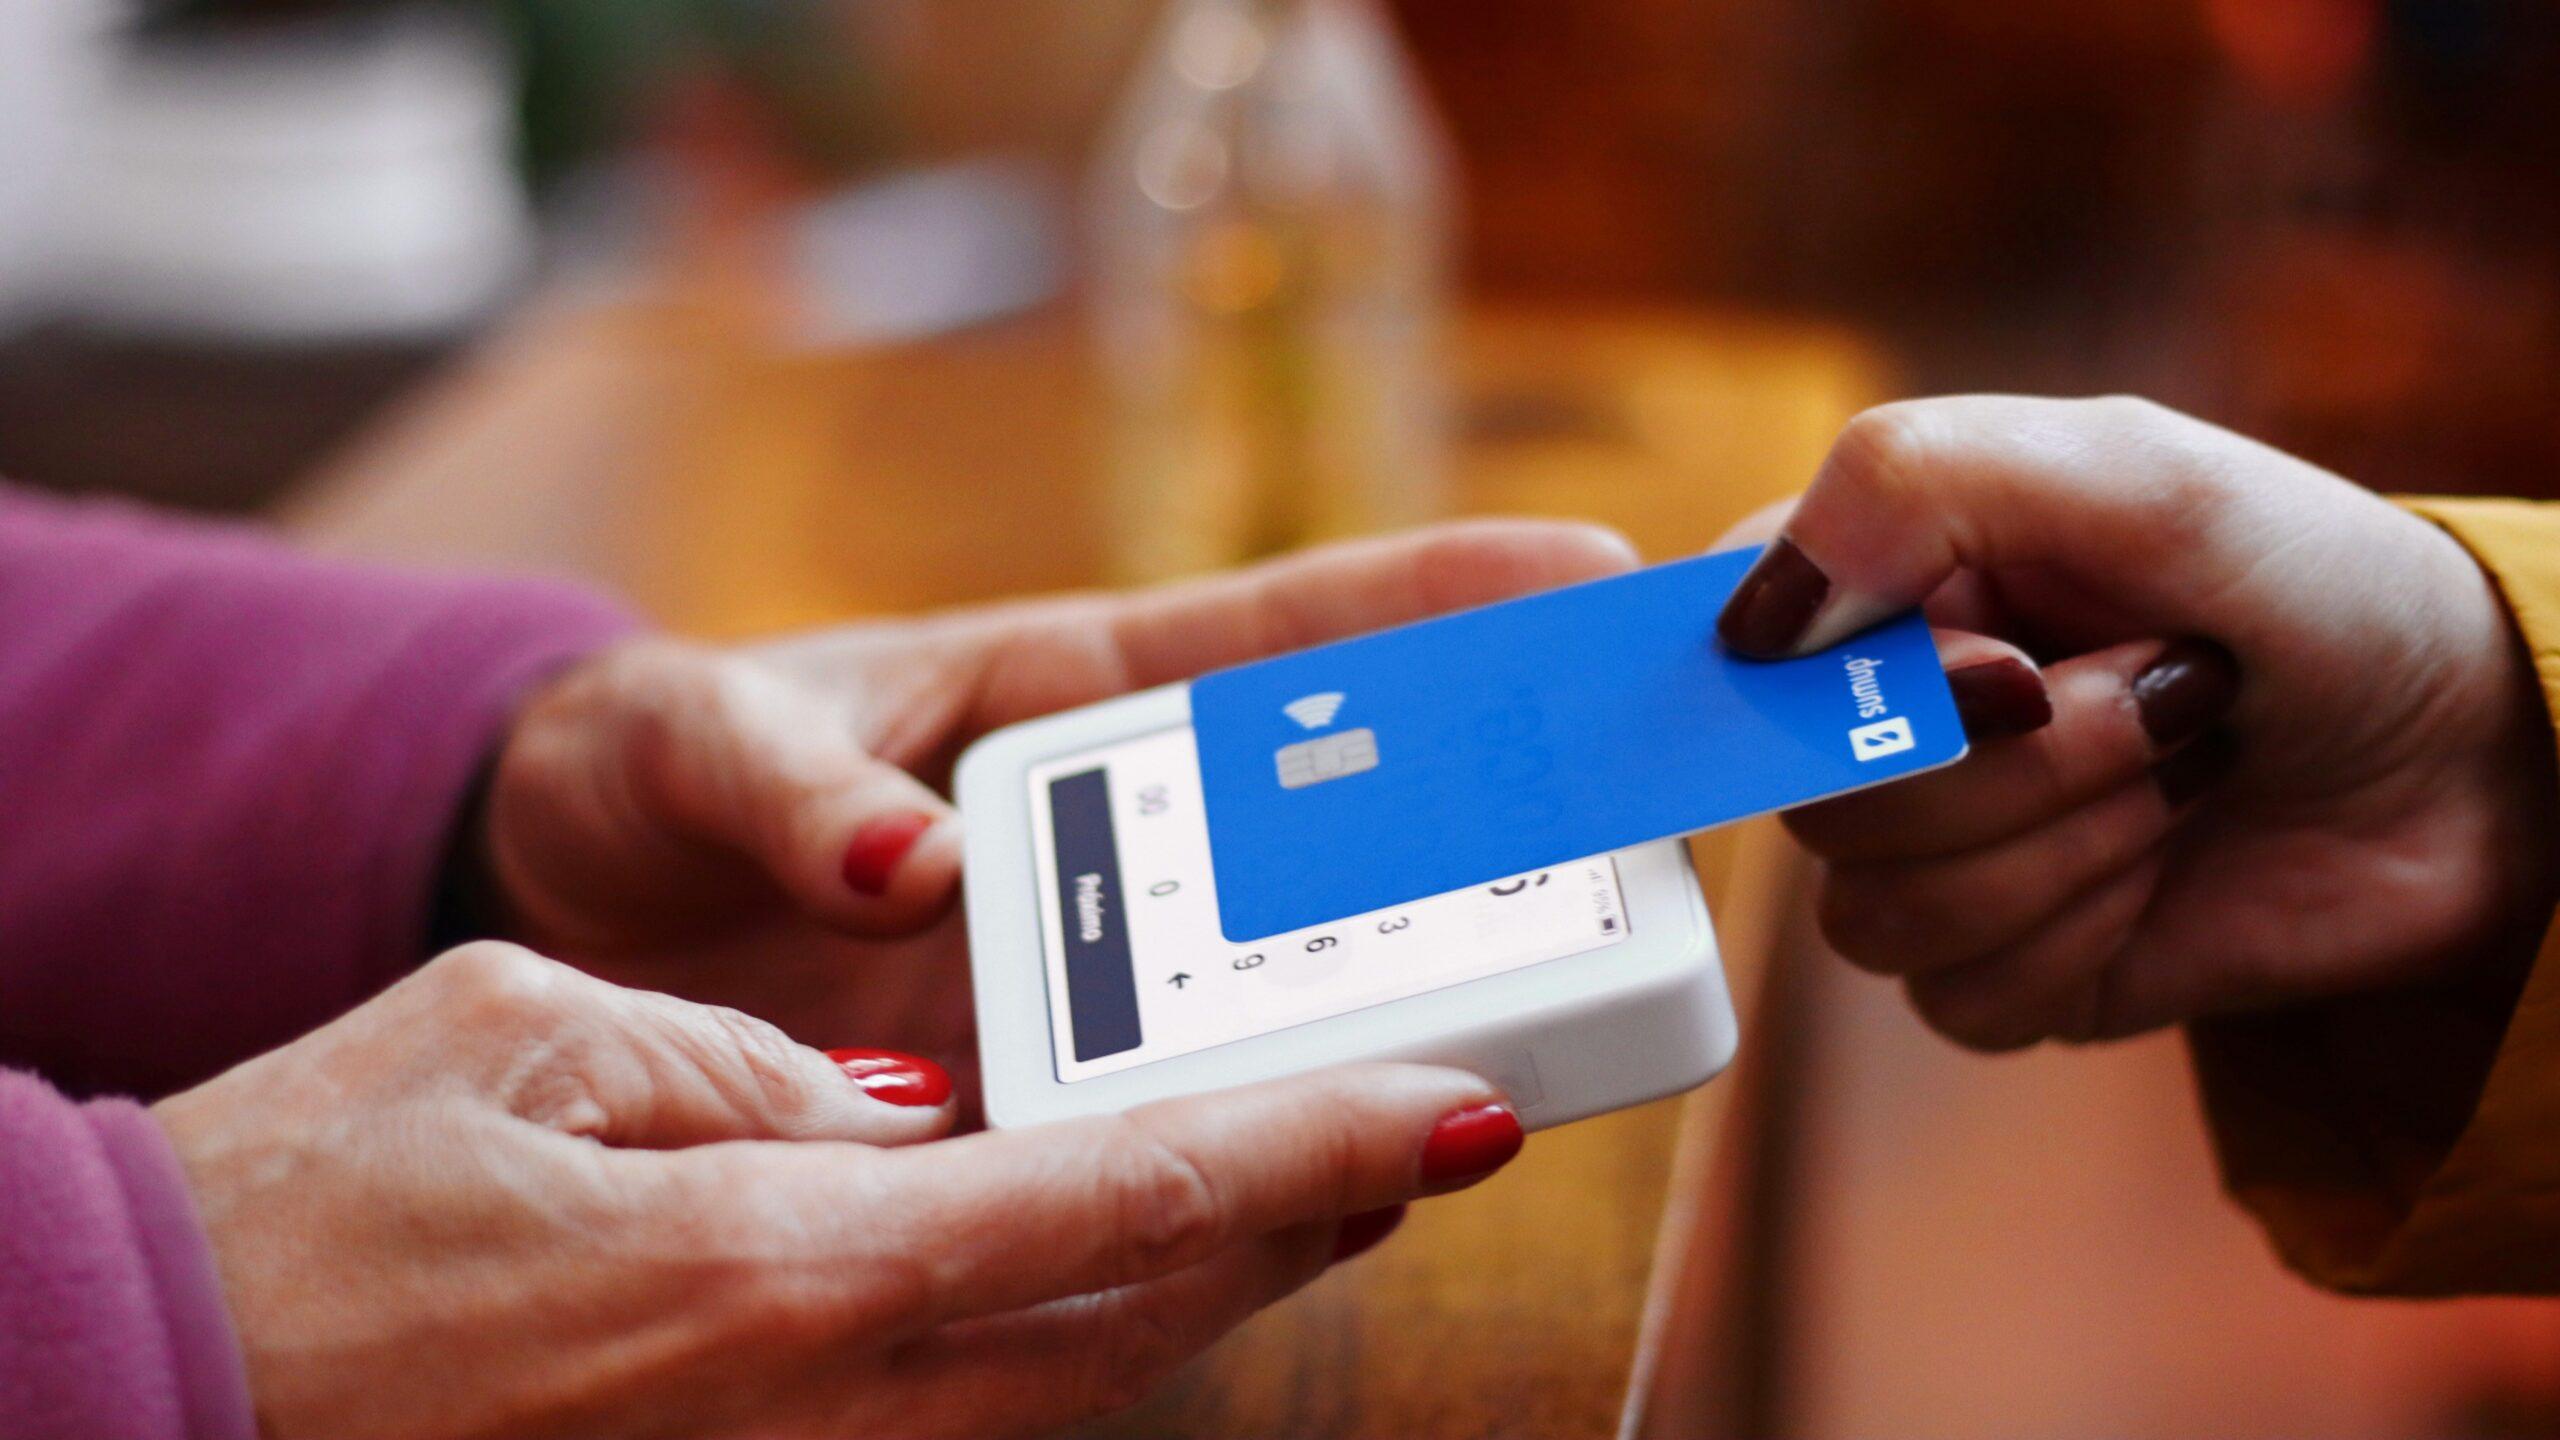 Close up of someone holding a debit or credit card while someone else holds a portable card-reading device.